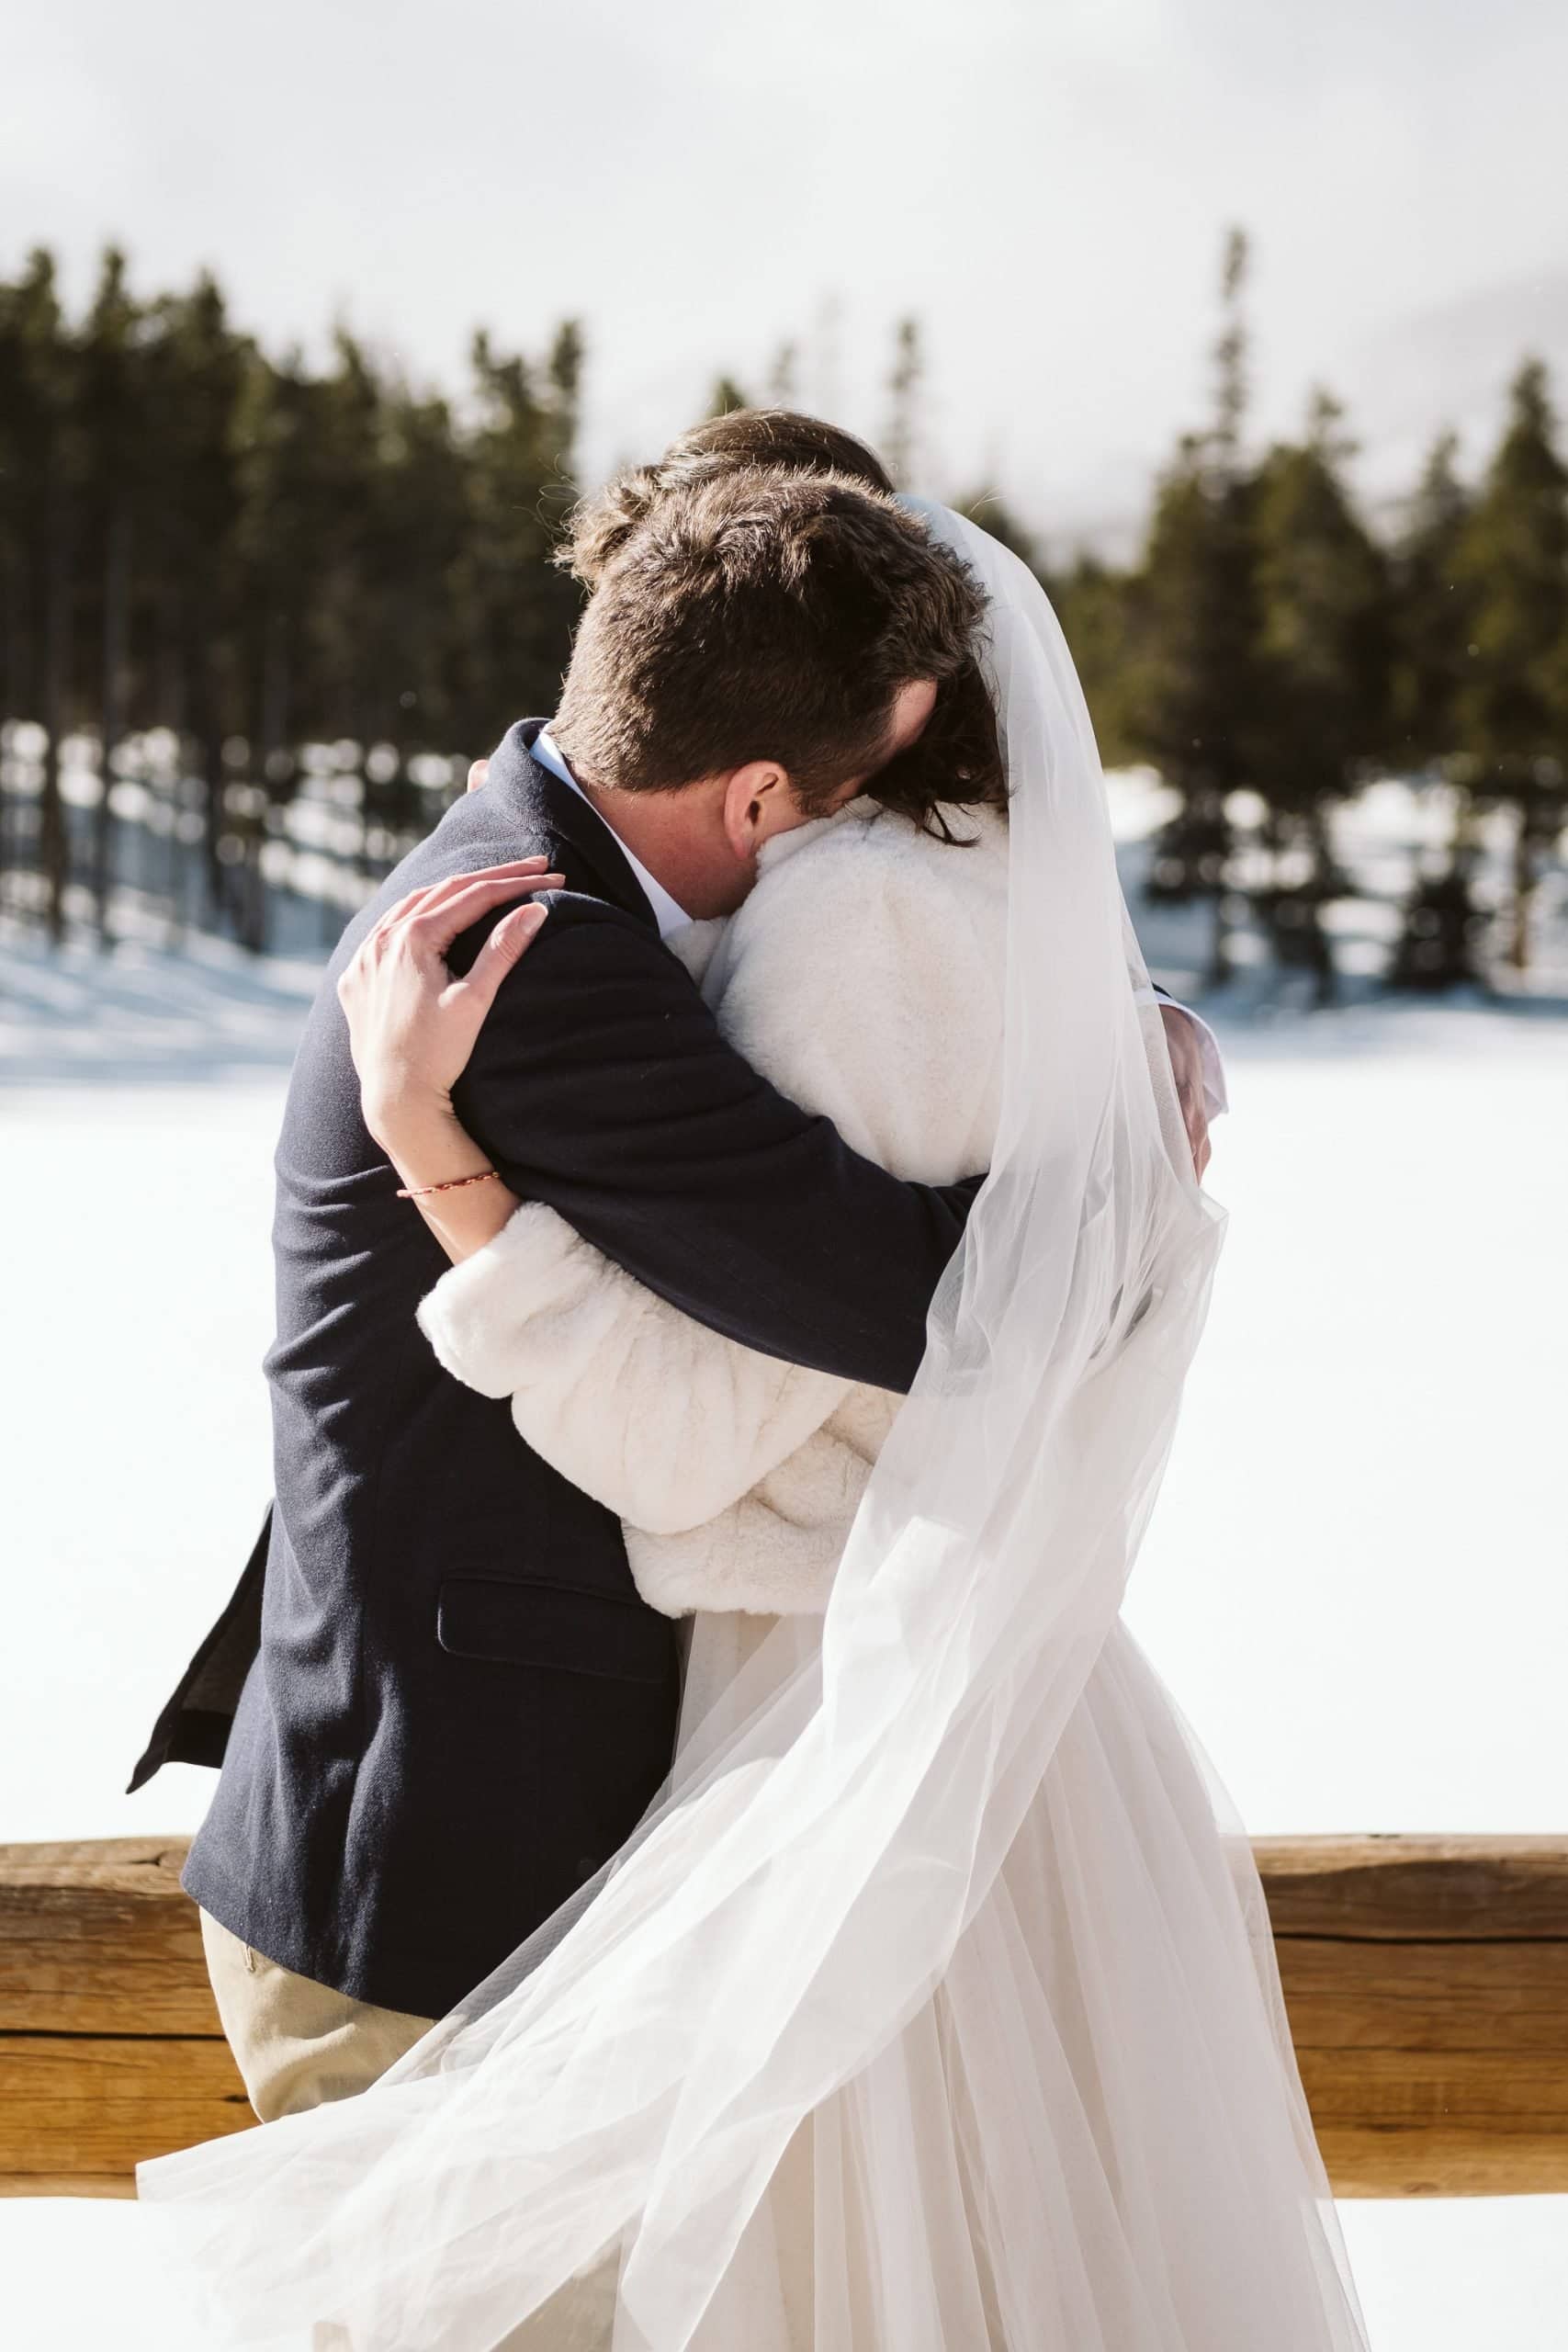 Sprague Lake elopement in winter in Rocky Mountain National Park.